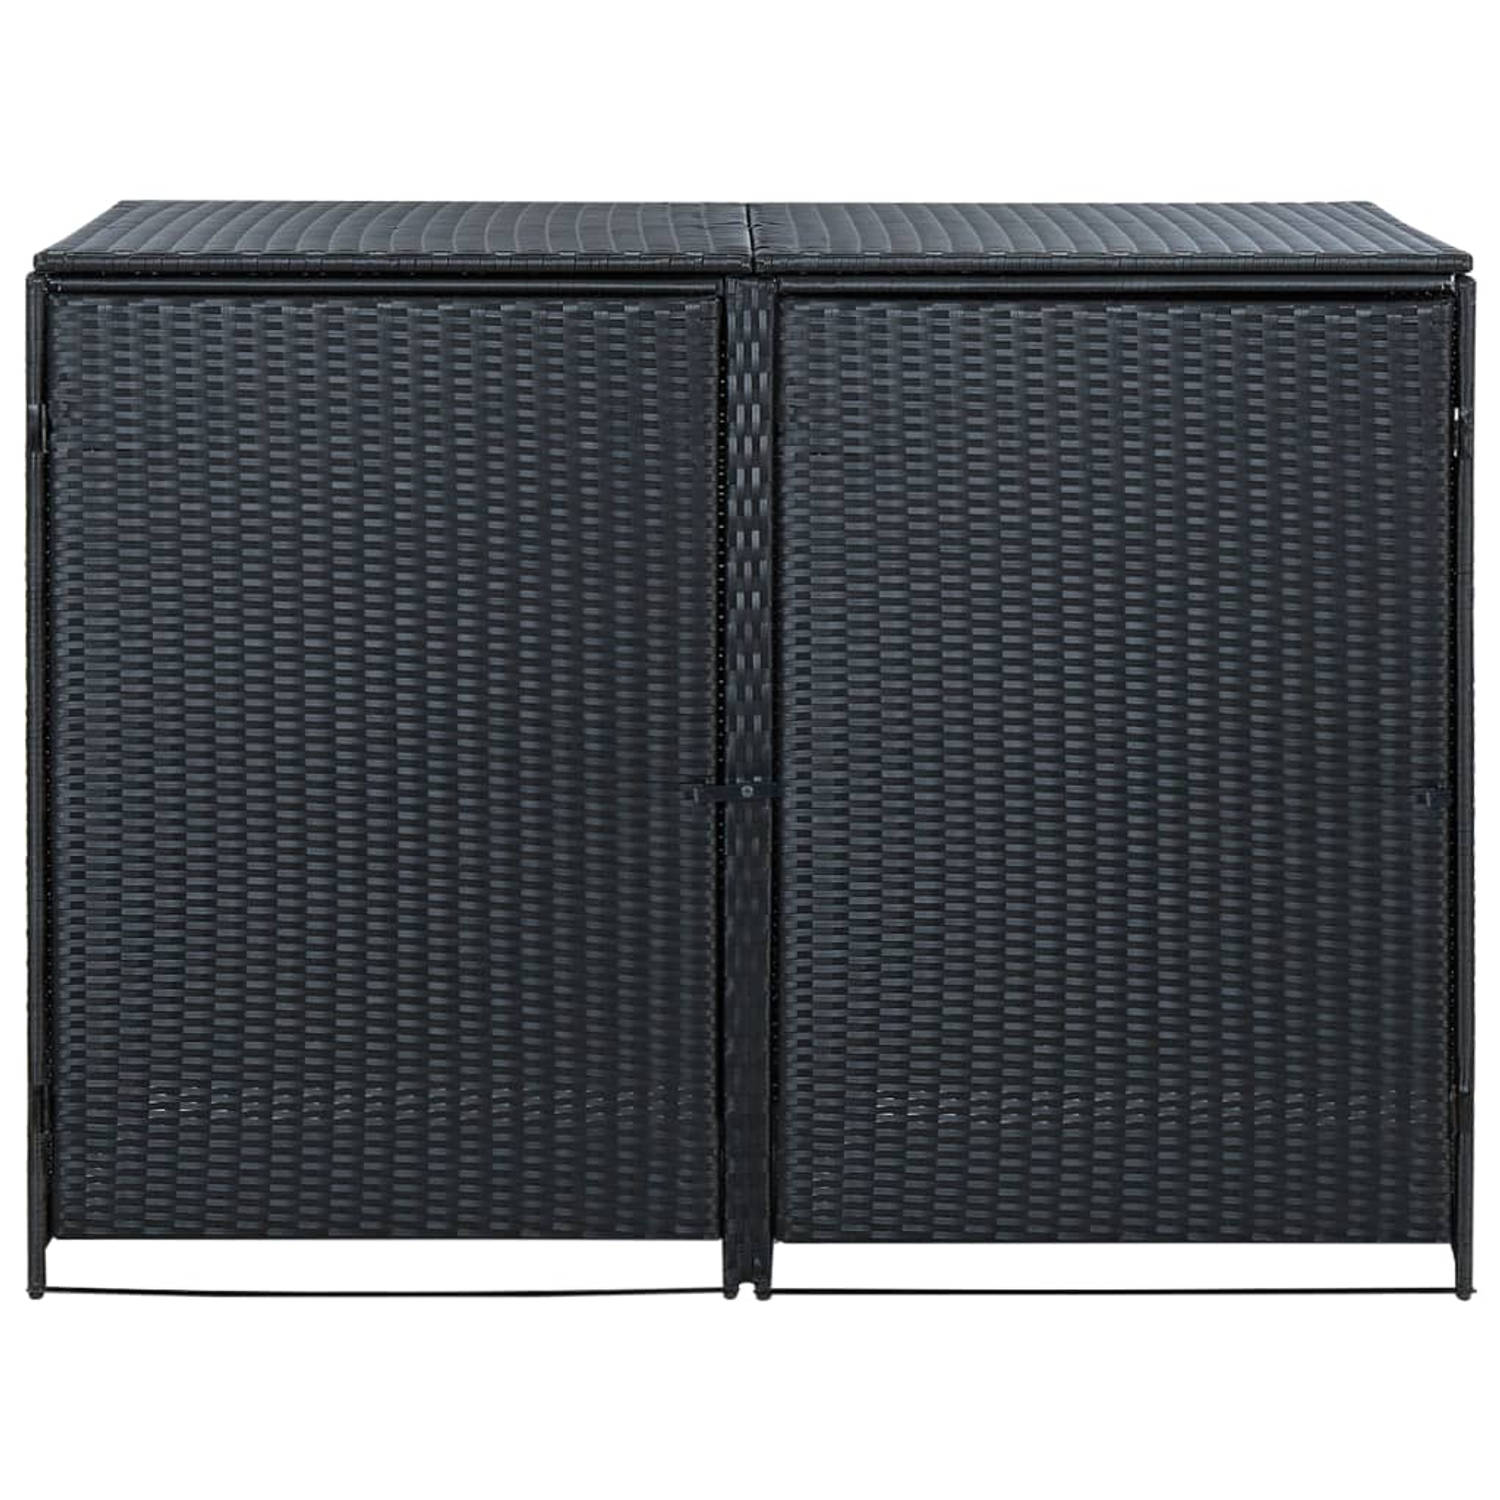 The Living Store Containerberging dubbel 148x80x111 cm poly rattan zwart - Tuinhuisje